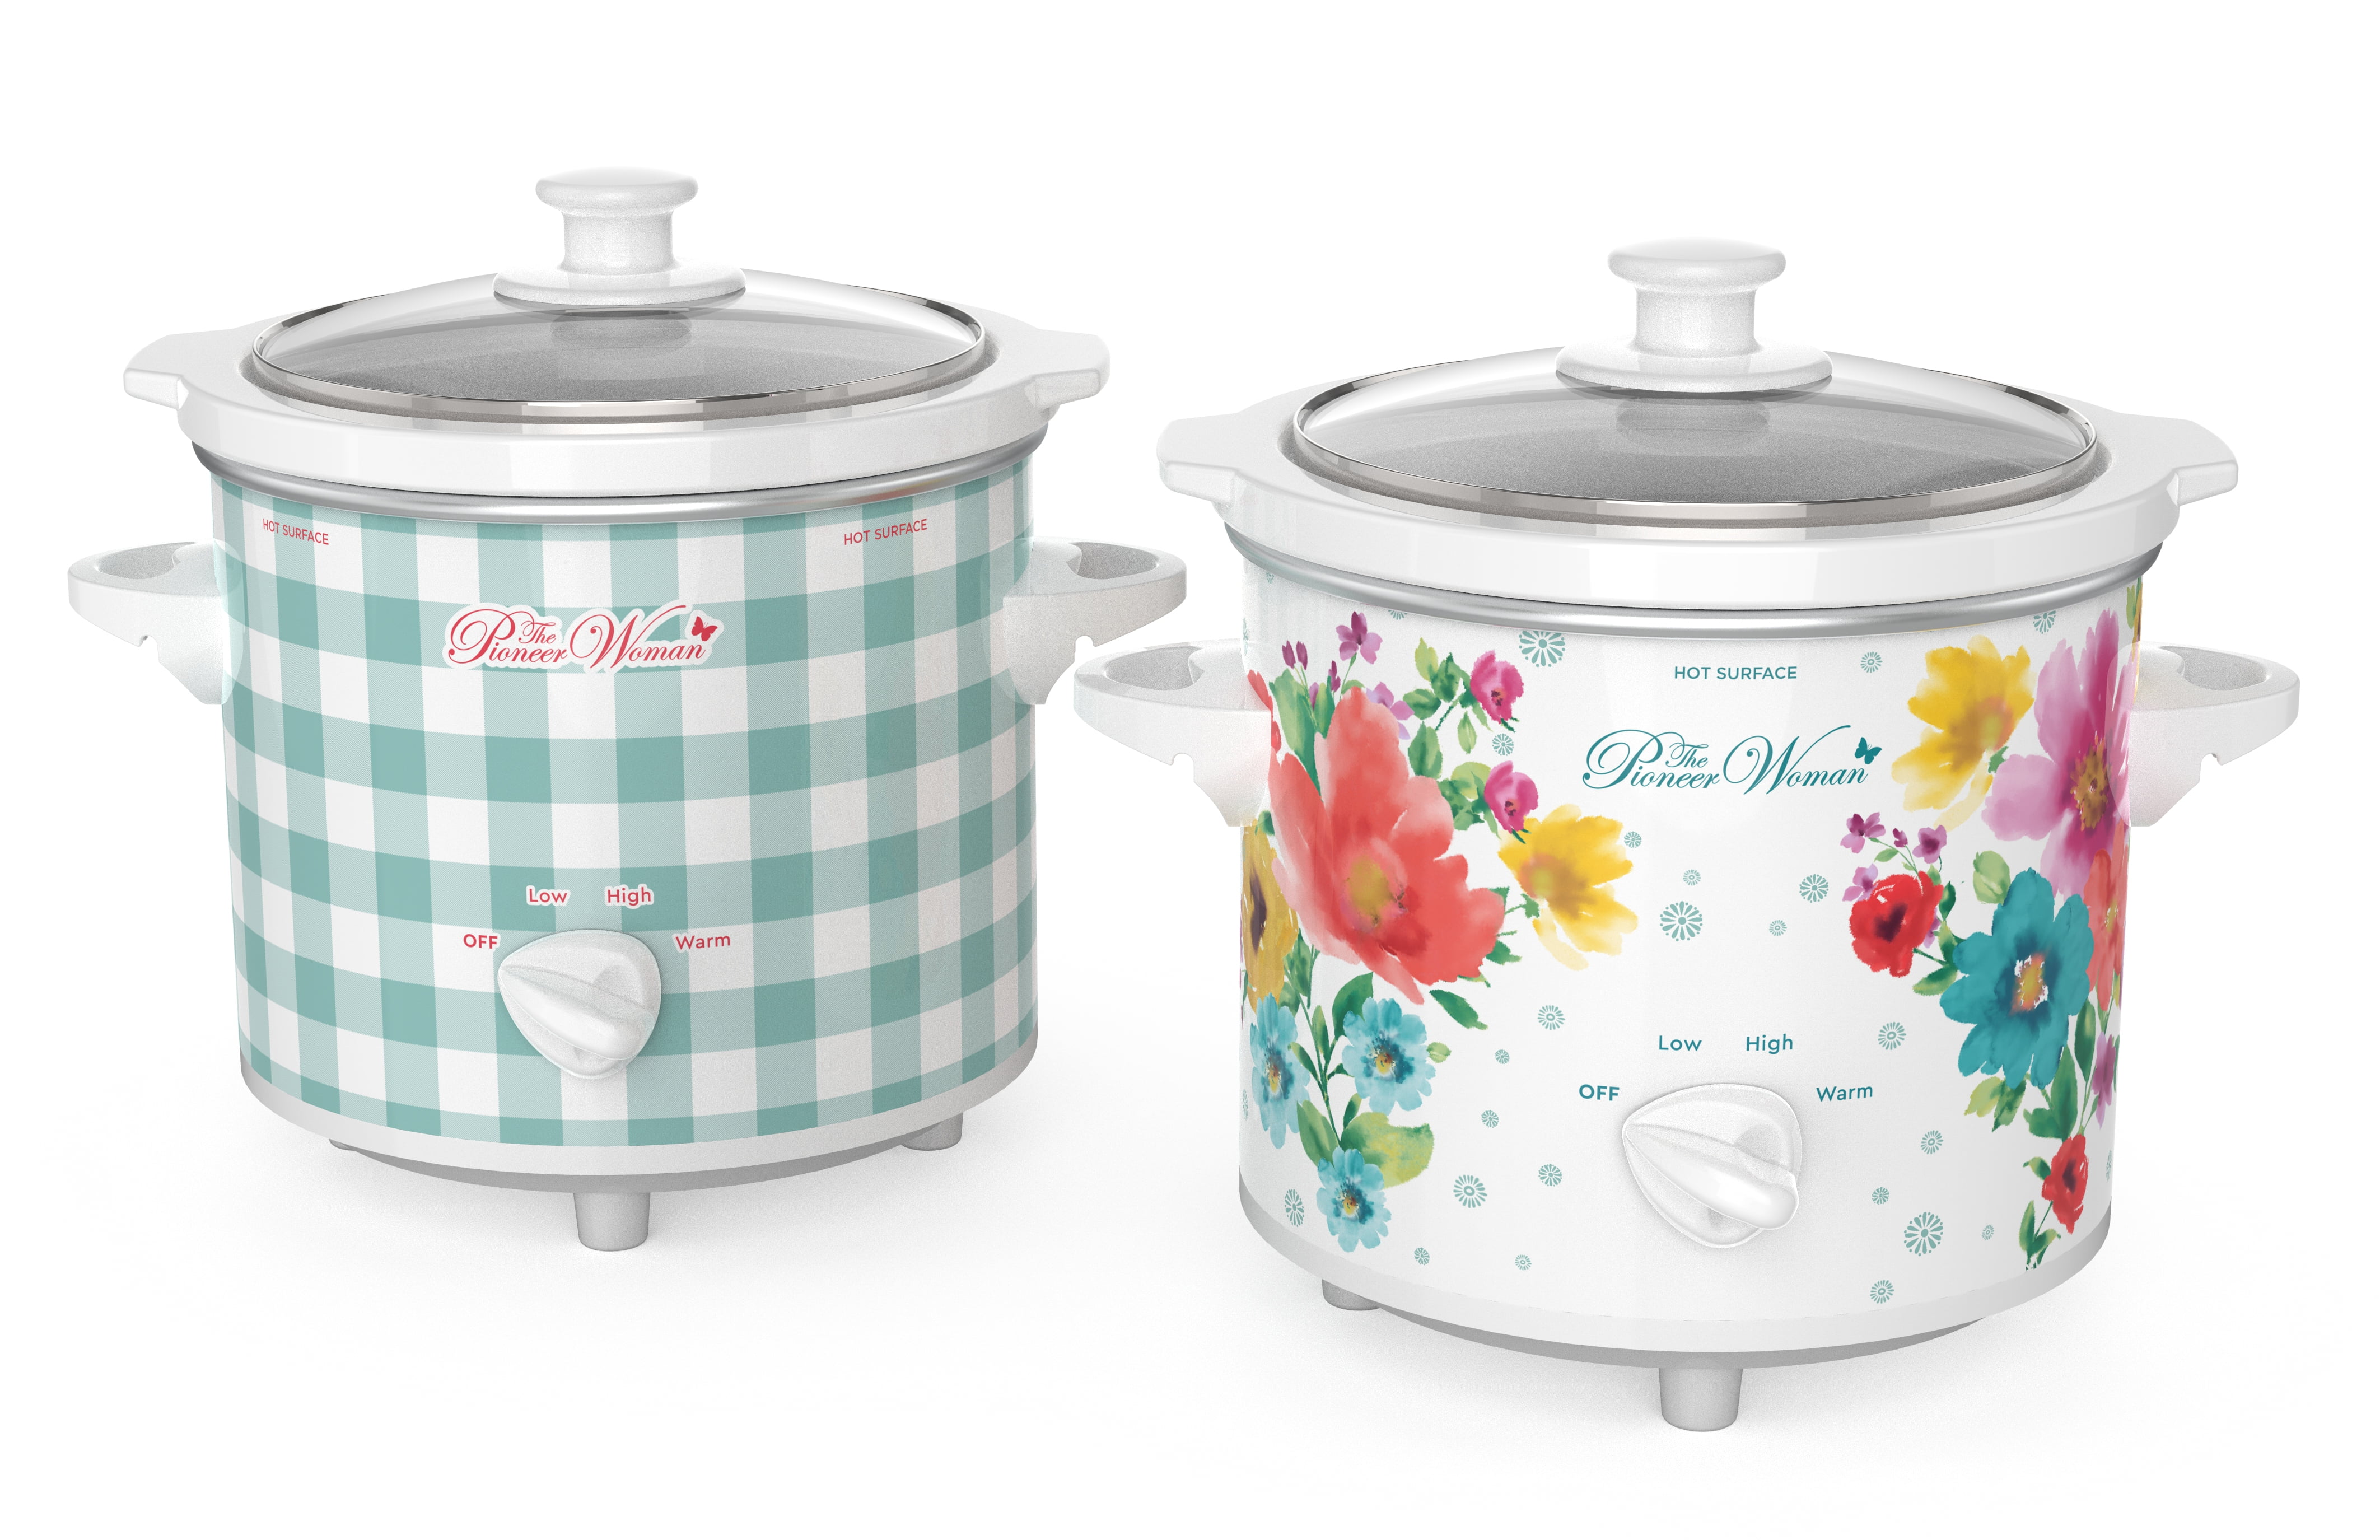 The Pioneer Woman Slow Cooker 1.5 Quart Twin Pack, Breezy Blossom